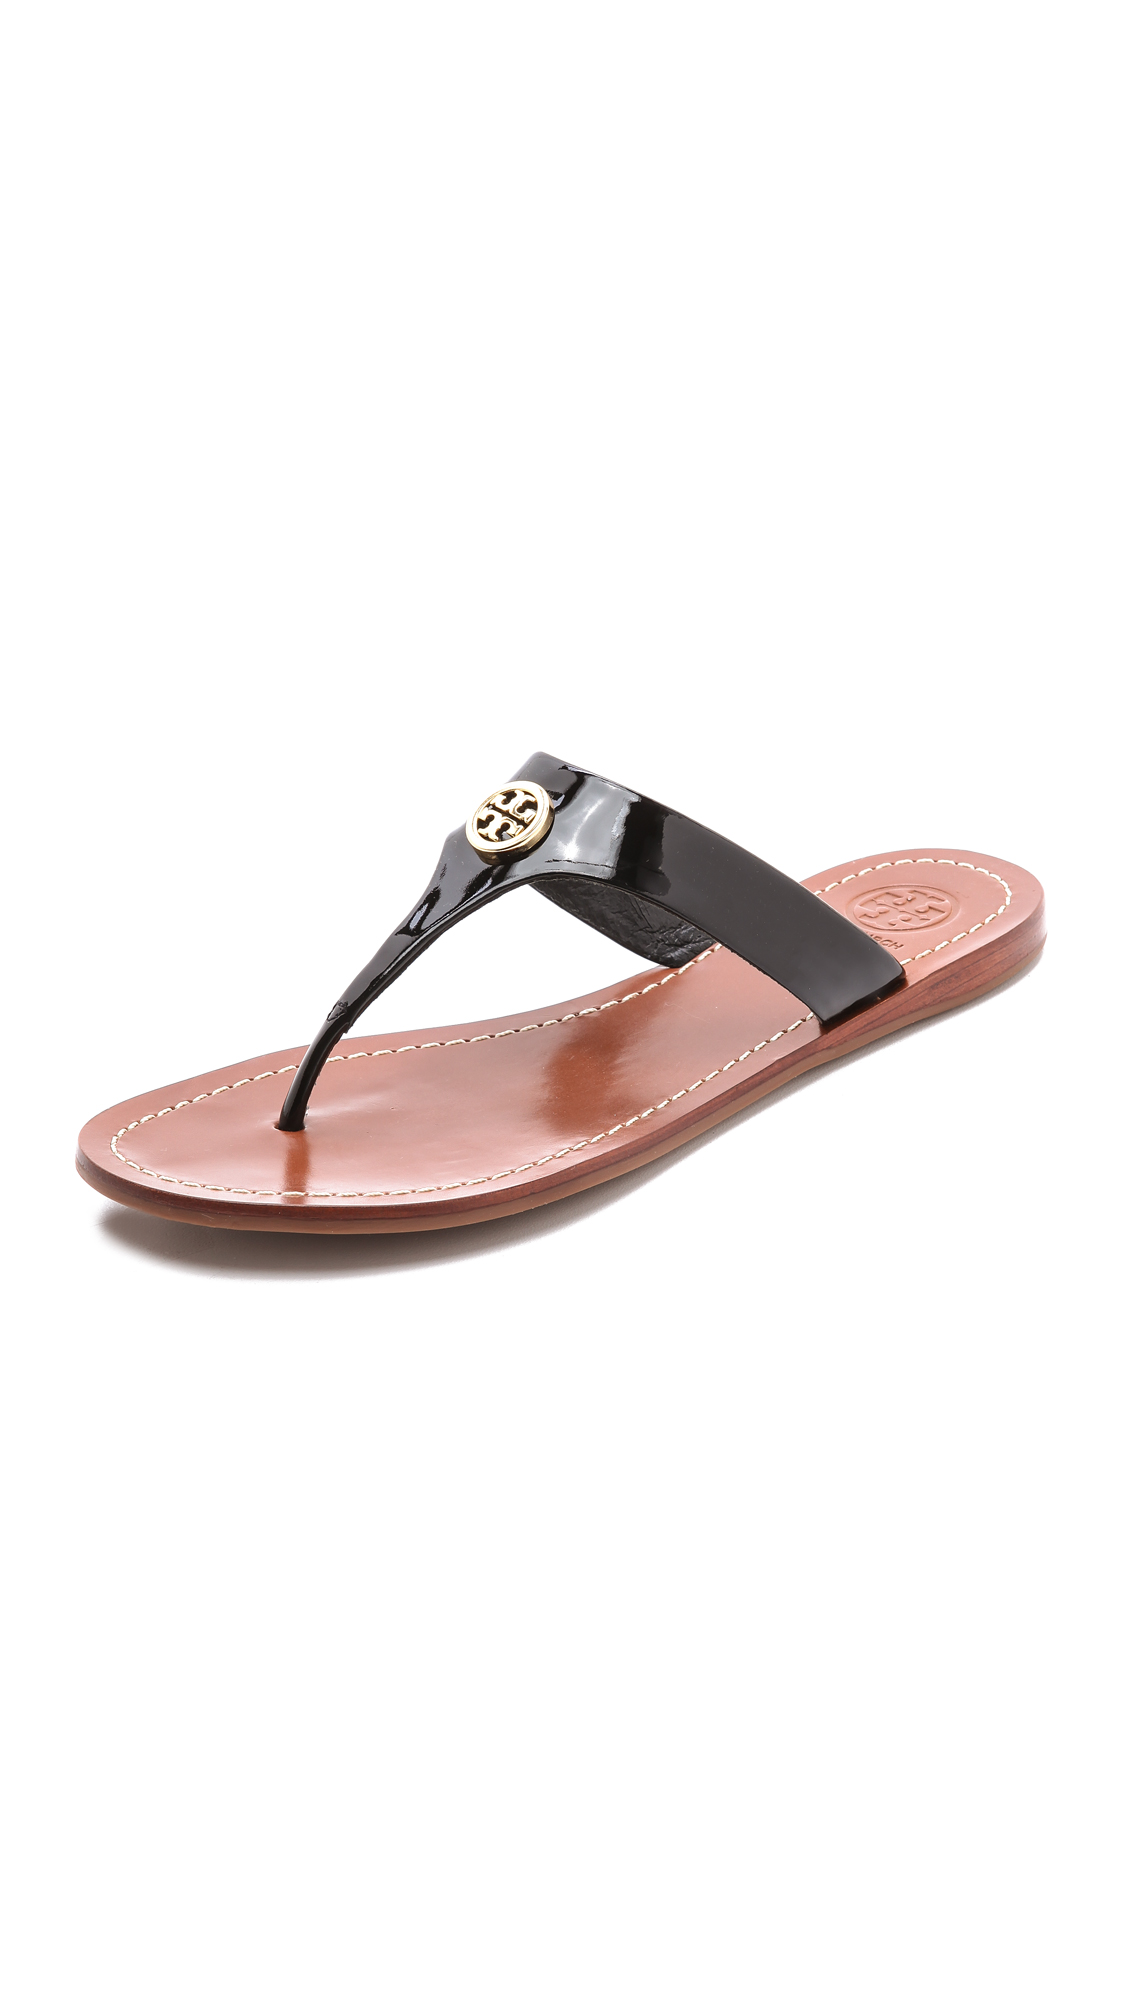 Tory Burch Cameron Thong Sandals in Black - Lyst